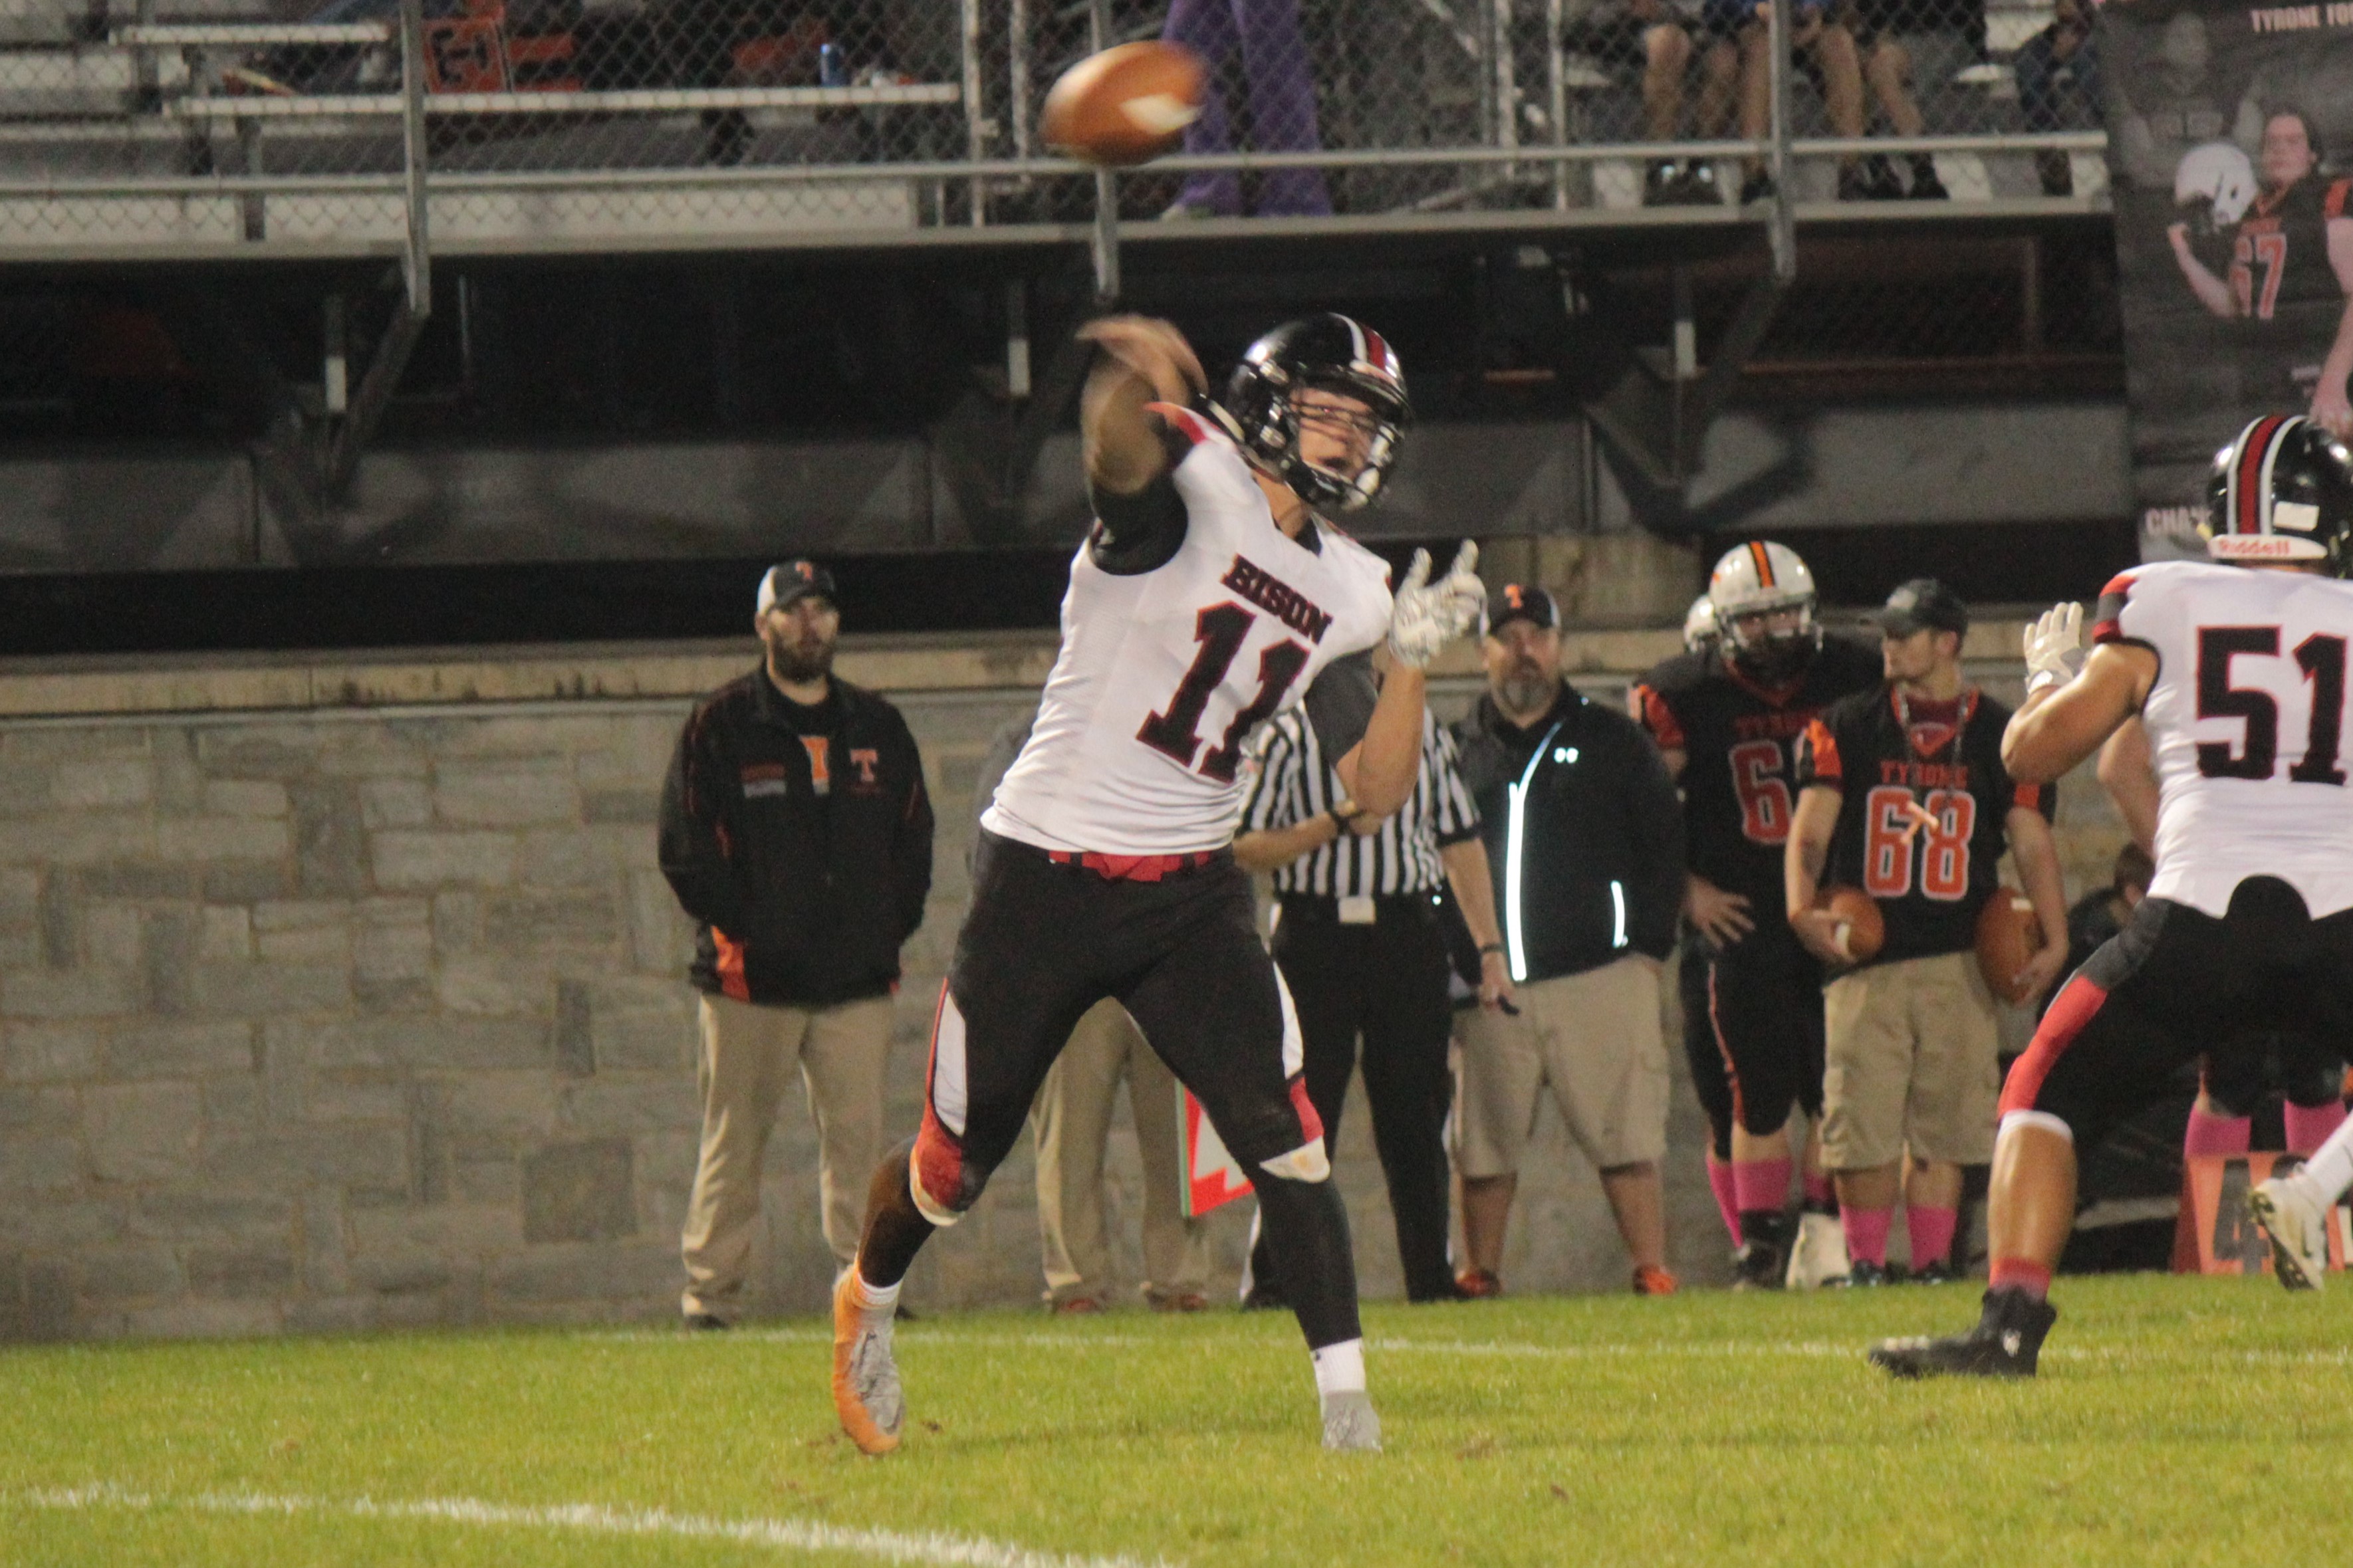 With 190 passing yards on the night, Isaac Rumery stands alone atop the all-time passing leaders at Clearfield.